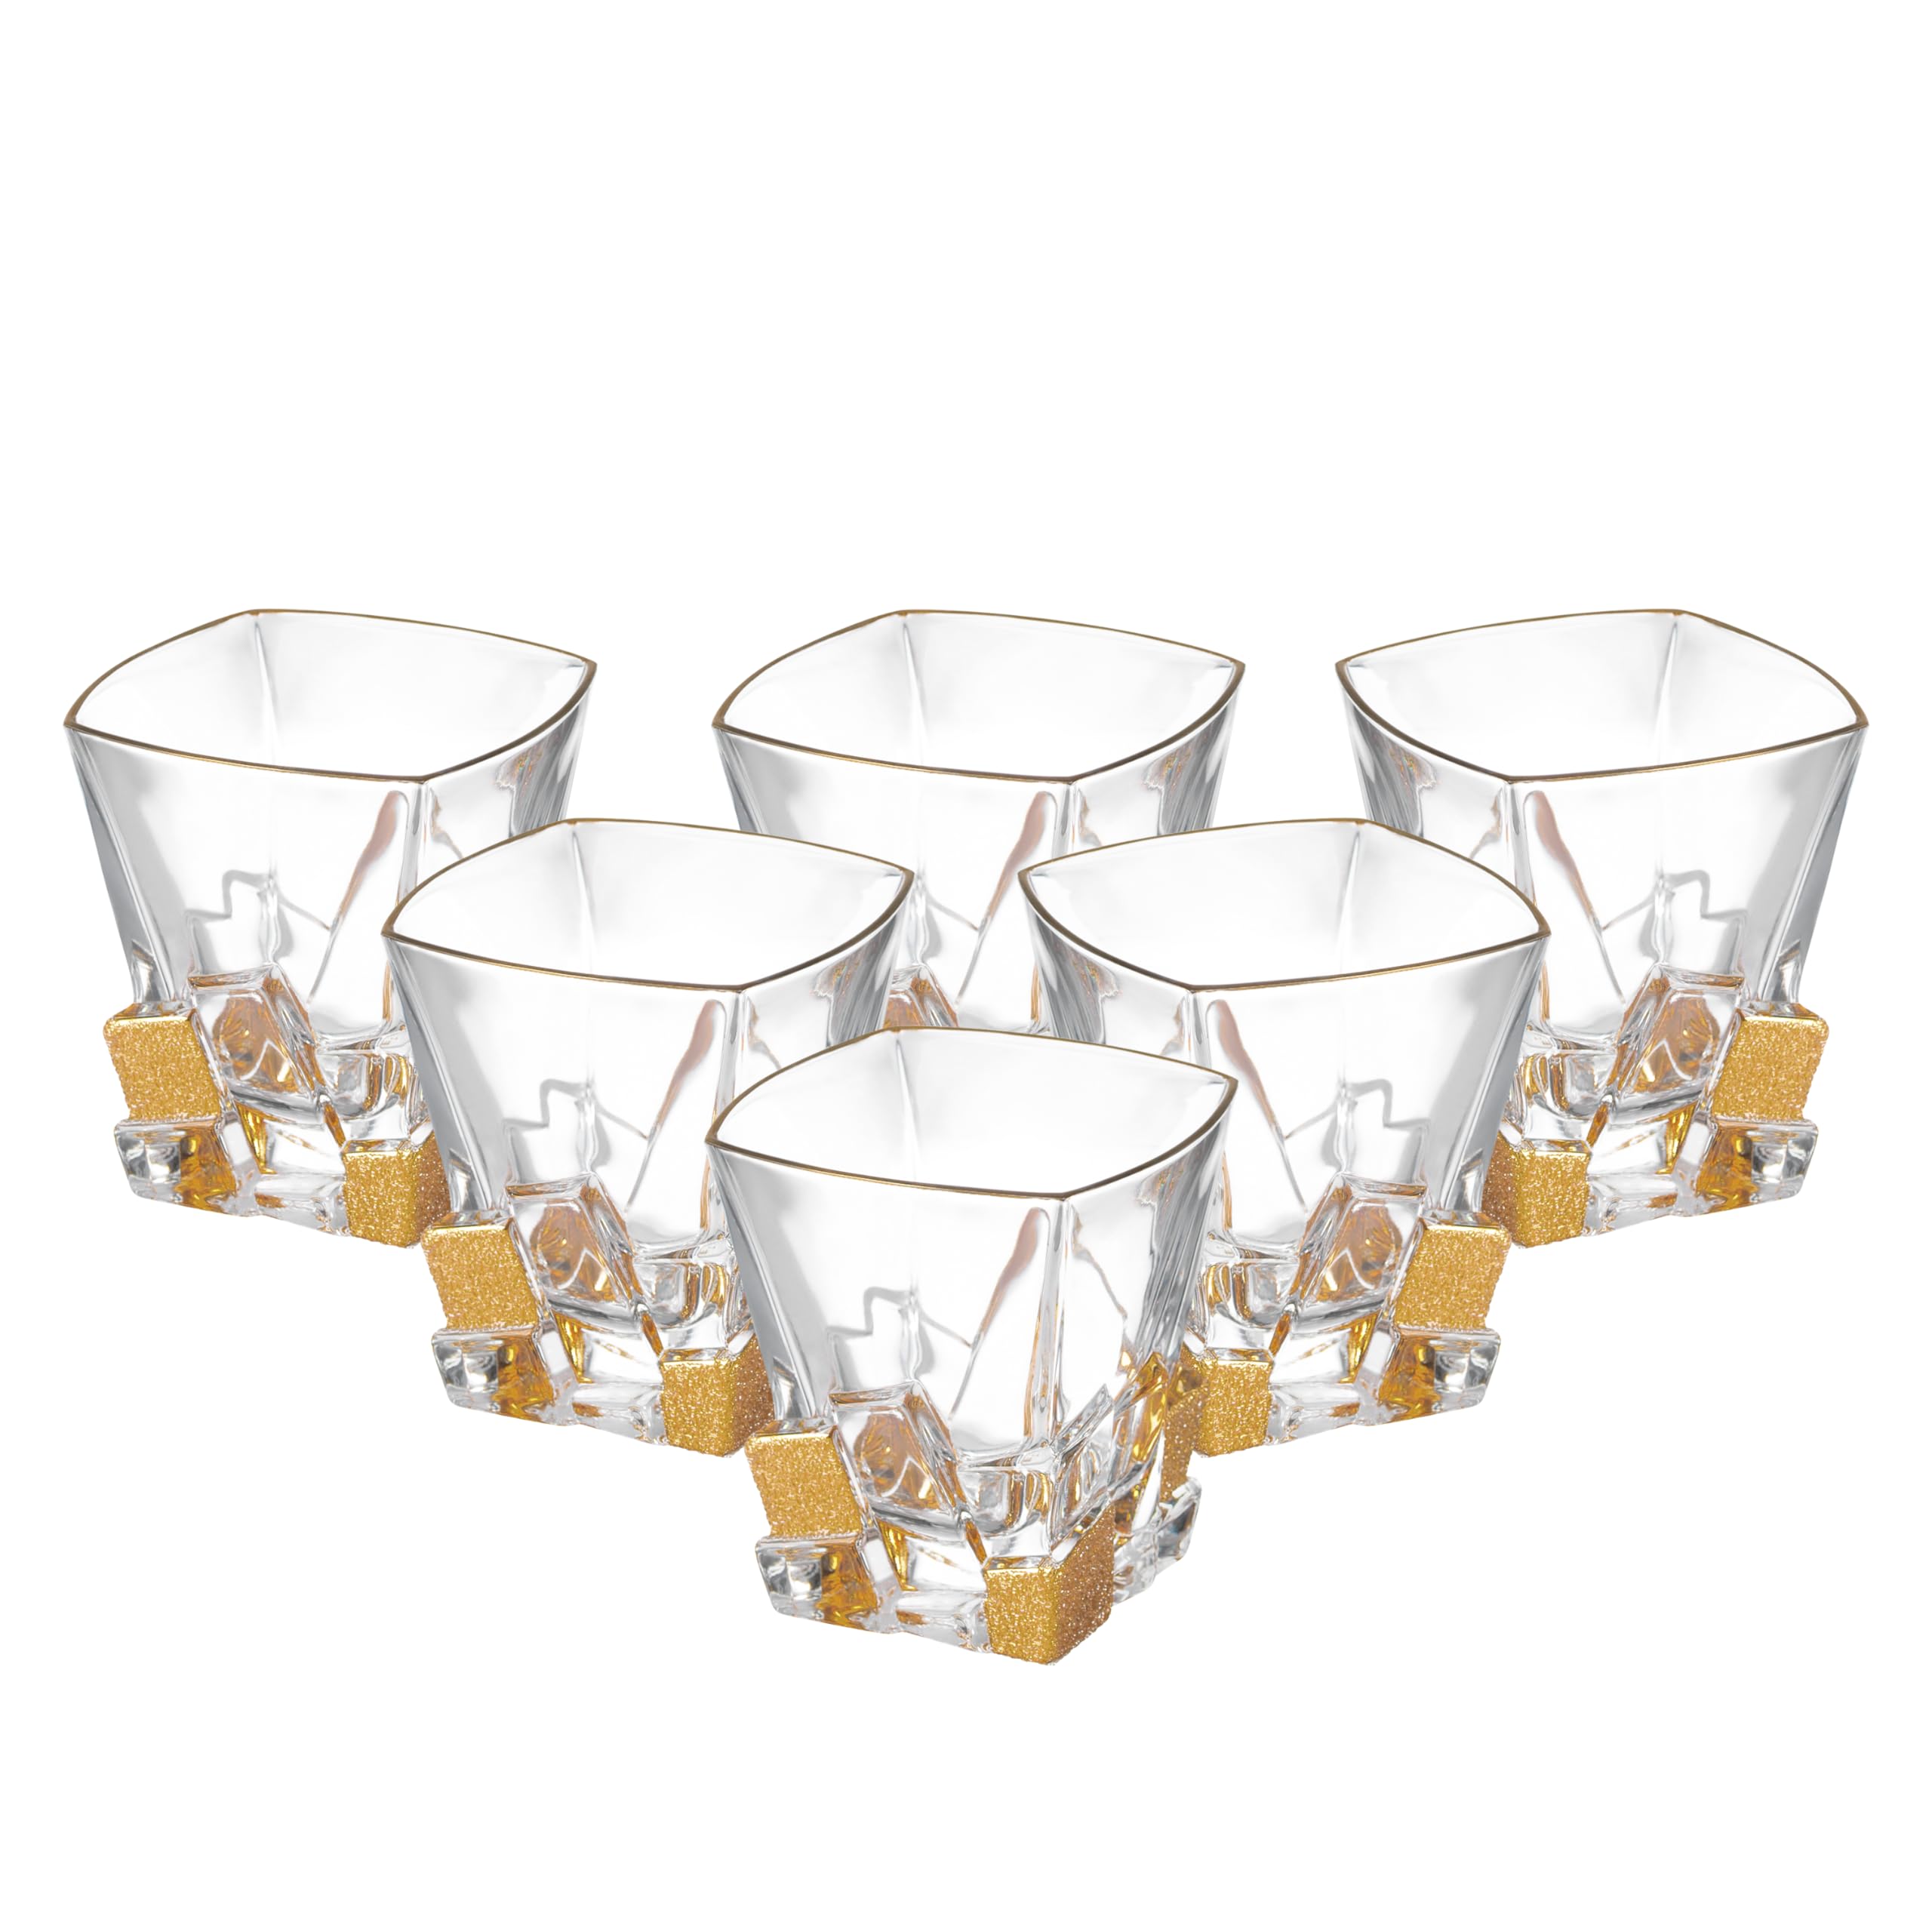 Barski - European Quality Glass - Crystal - Set of 6 - Square Shaped - Double Old Fashioned Tumblers - DOF - Tumbler is 11.7 oz. - with Matte Gold Ice Cubes Design - Glasses are Made in Europe